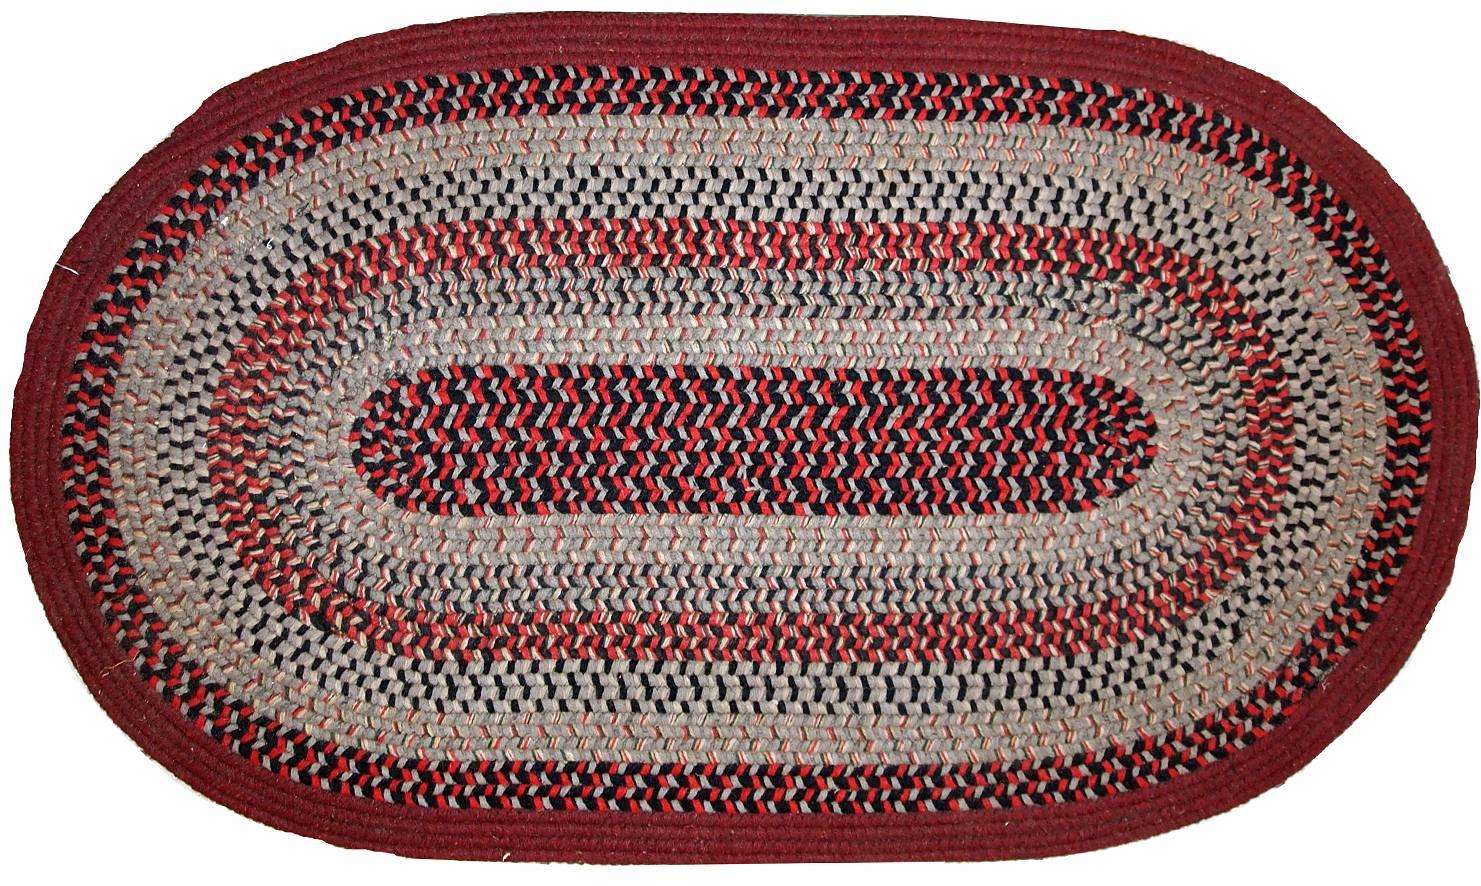 Handmade antique American braided rug in original good condition. The rug made in red, grey, burgundy and black shades. It is thick and strong.